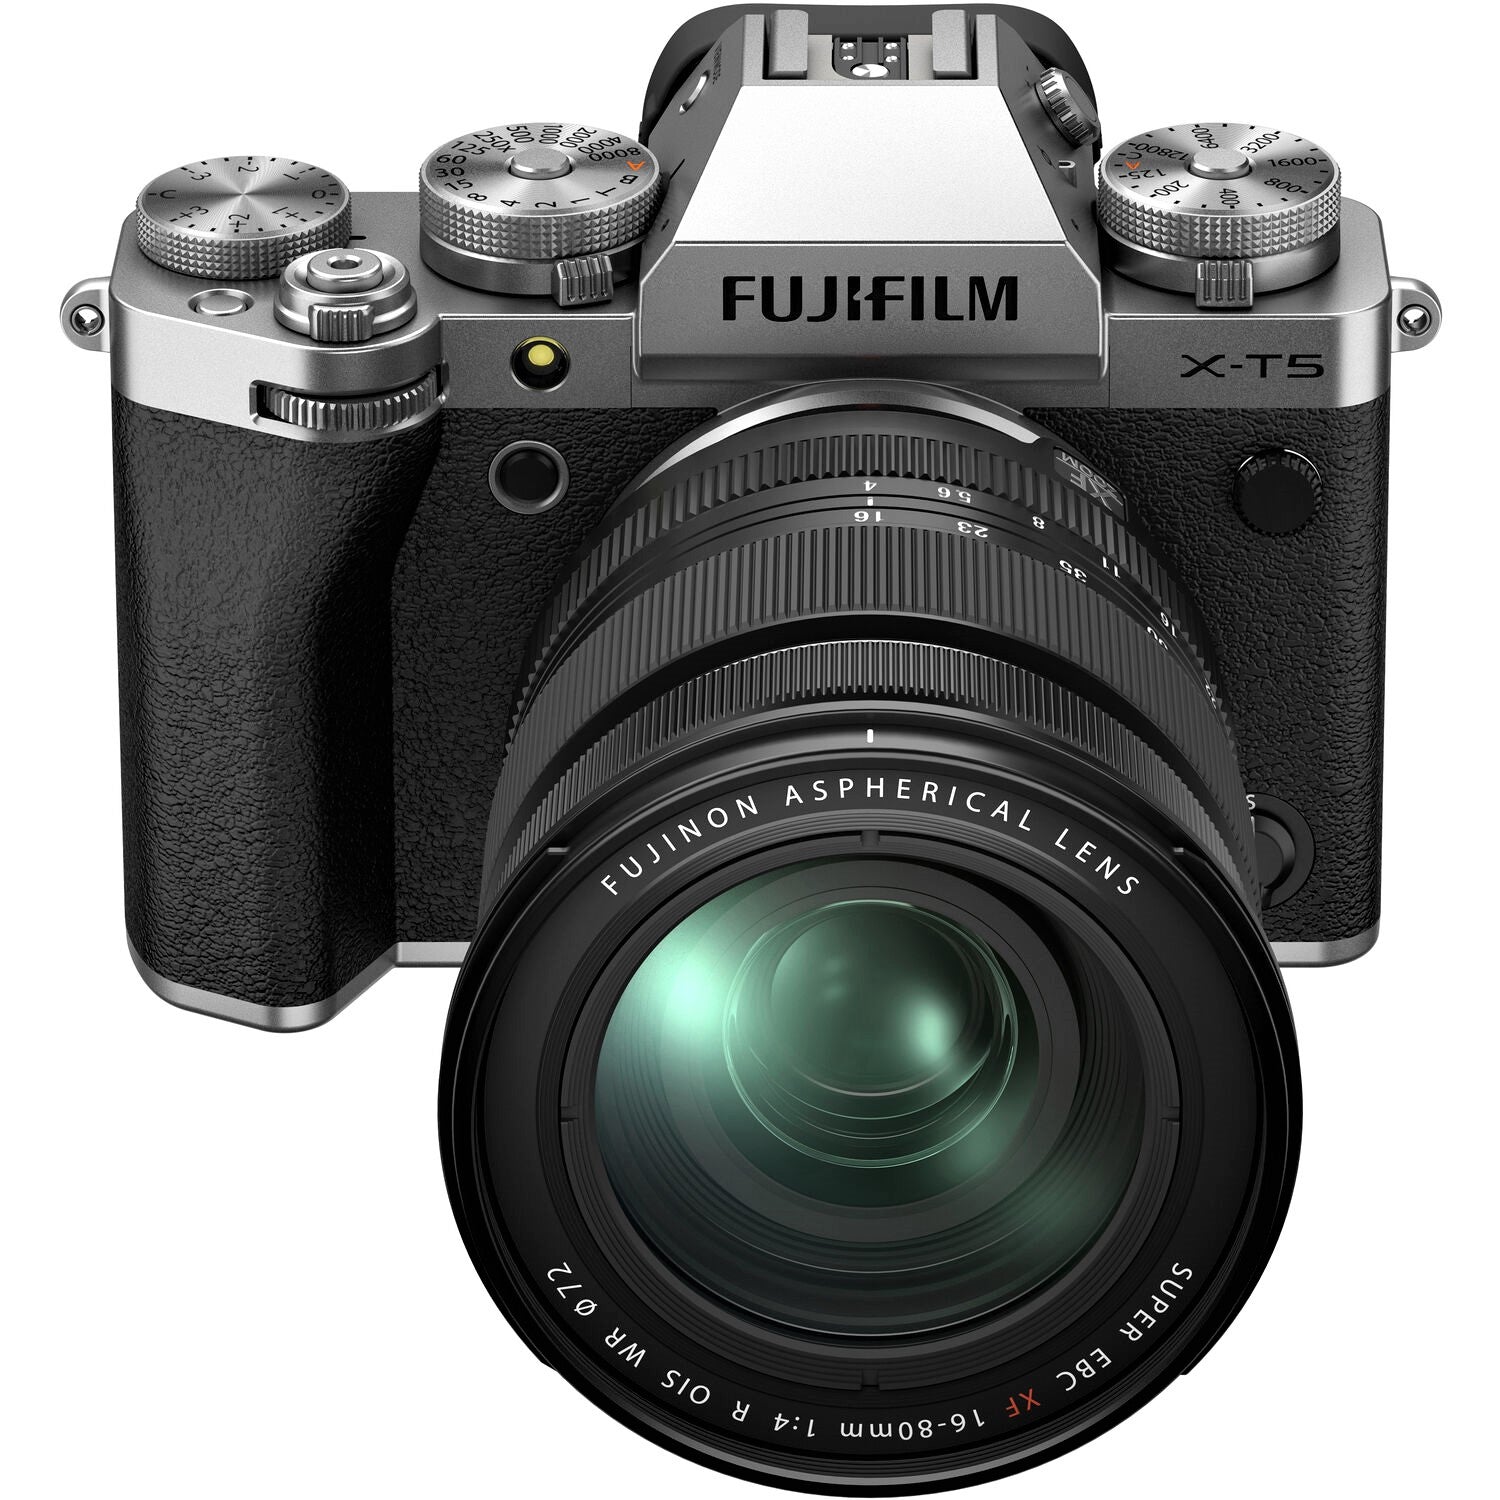 Fujifilm X-T5 Mirrorless Camera with 16-80mm Lens (Silver) - Front view